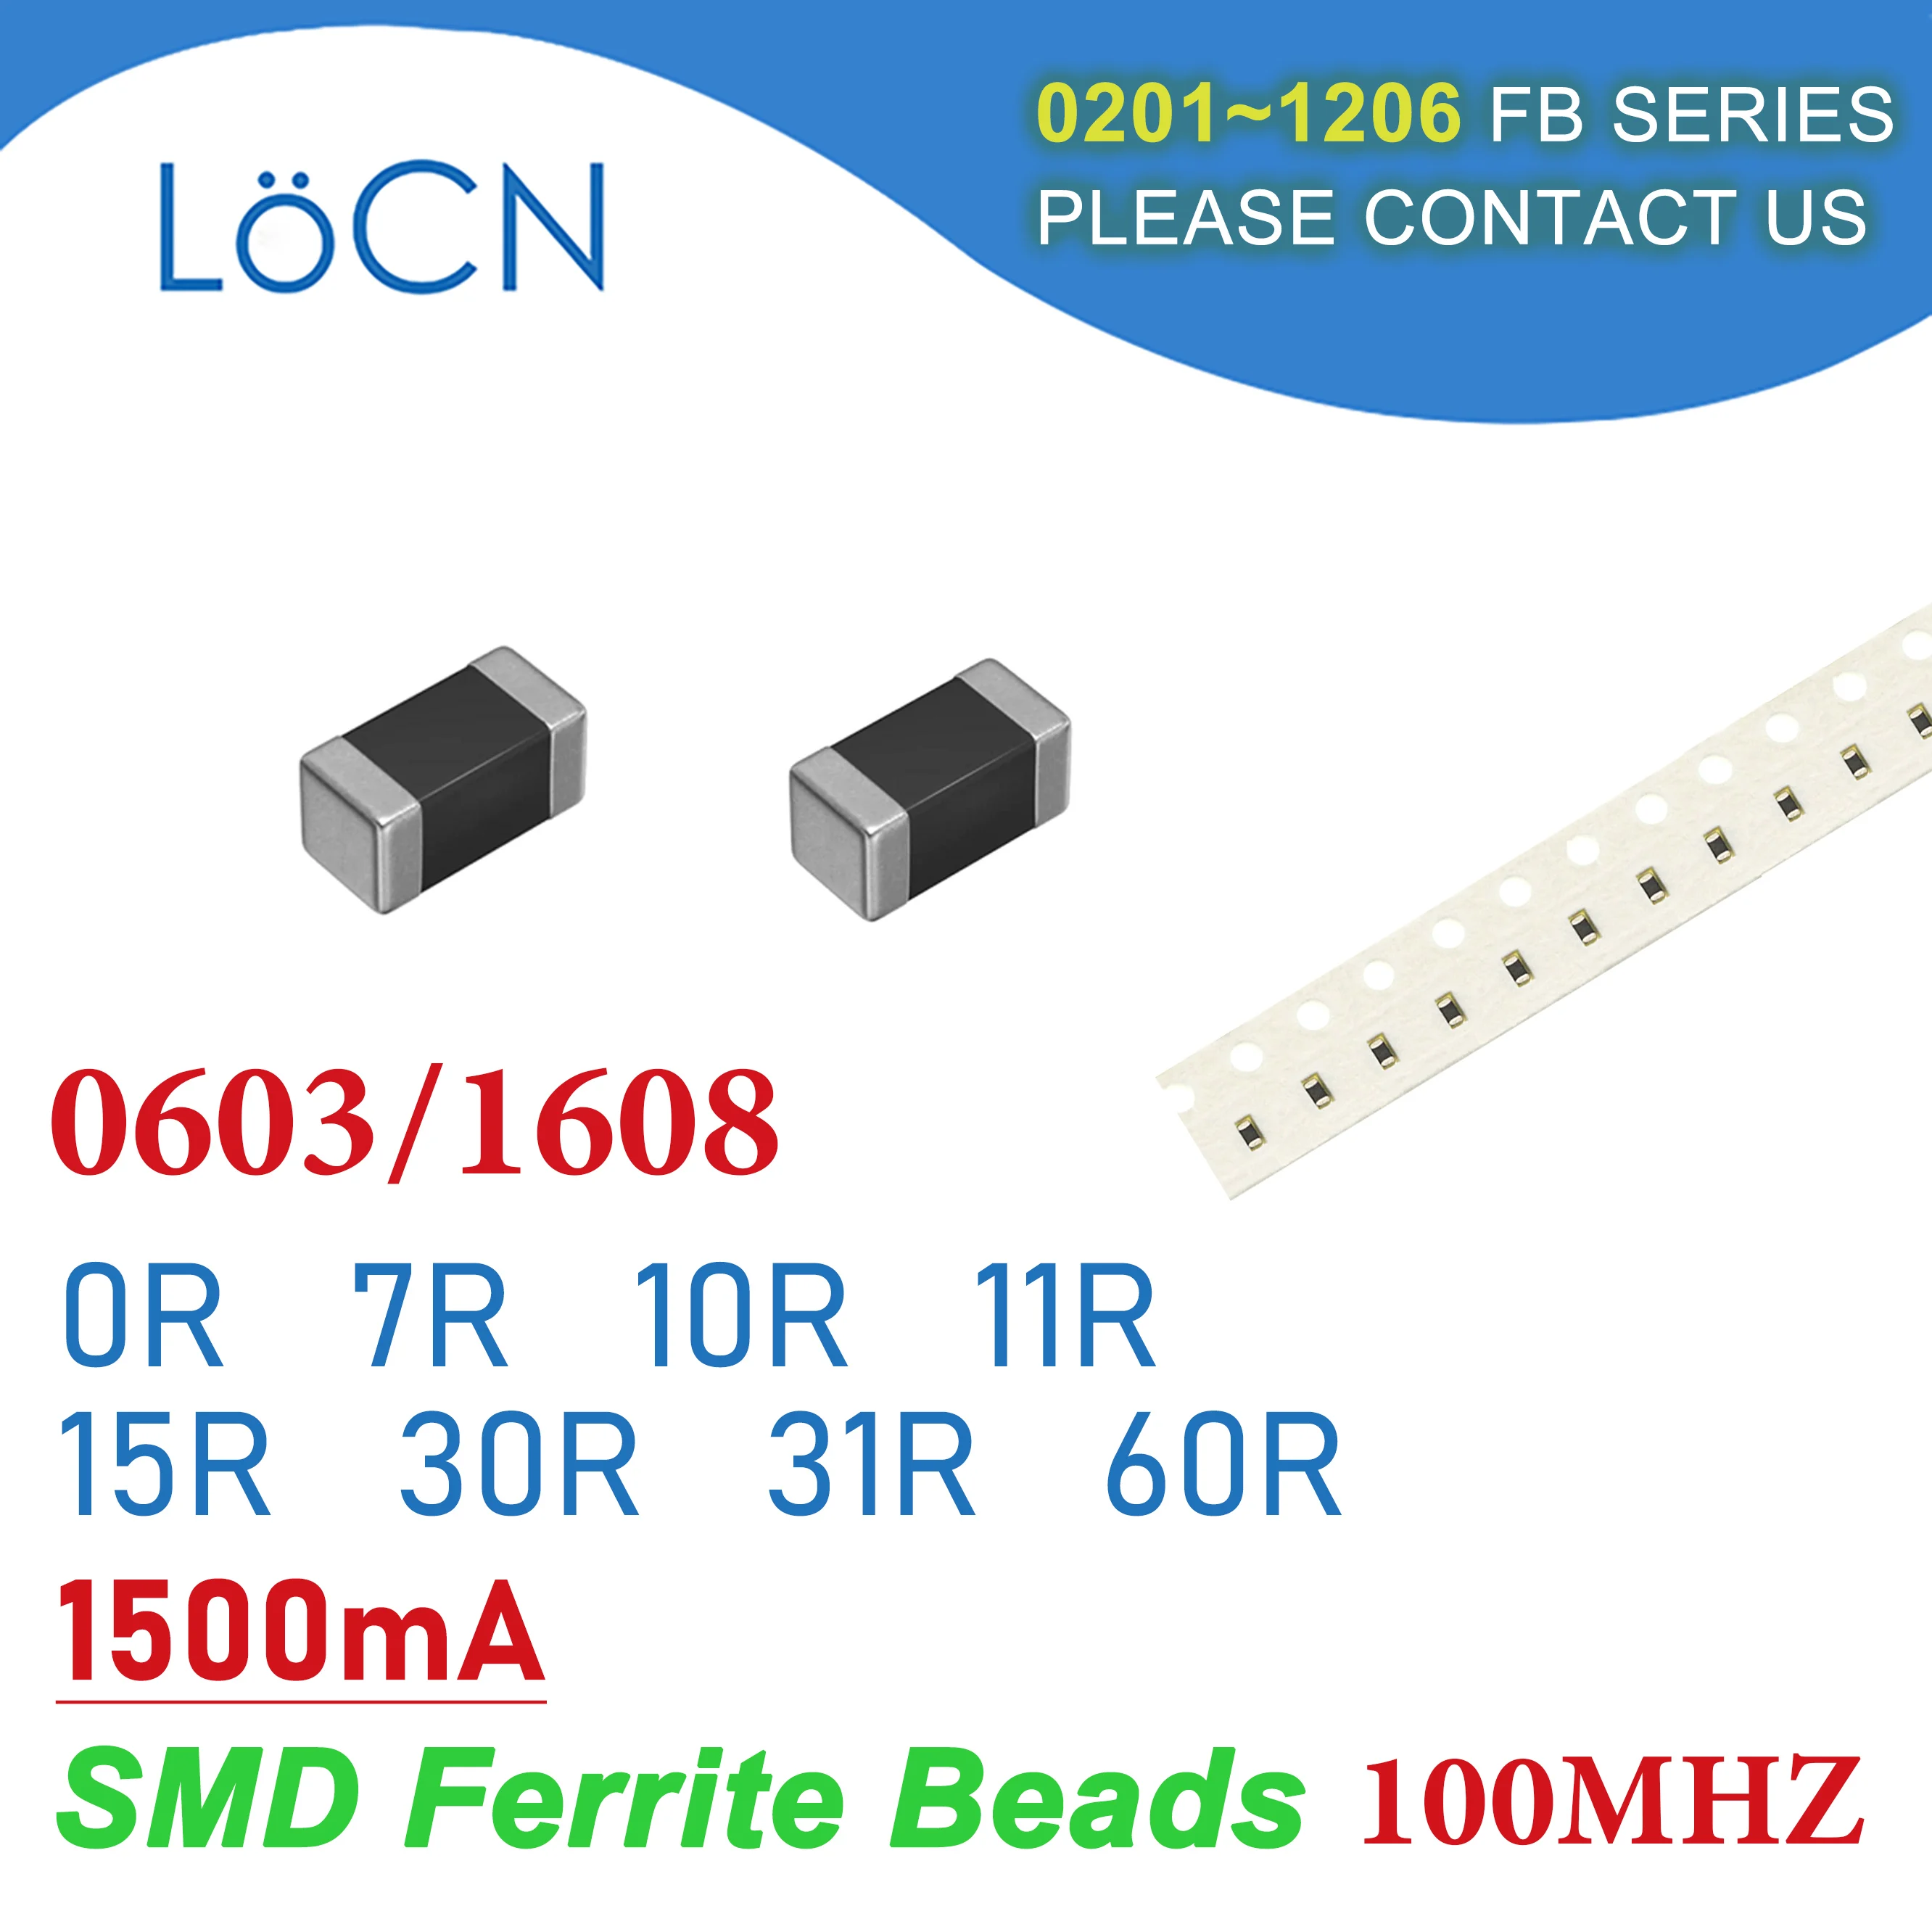 

4000PCS 0603/1608 100MHZ 1.5A SMD Ferrite Beads 0R 7R 10R 11R 15R 30R 31R 60R Chip Inductor Multilayer 25% 1500mA High Quality